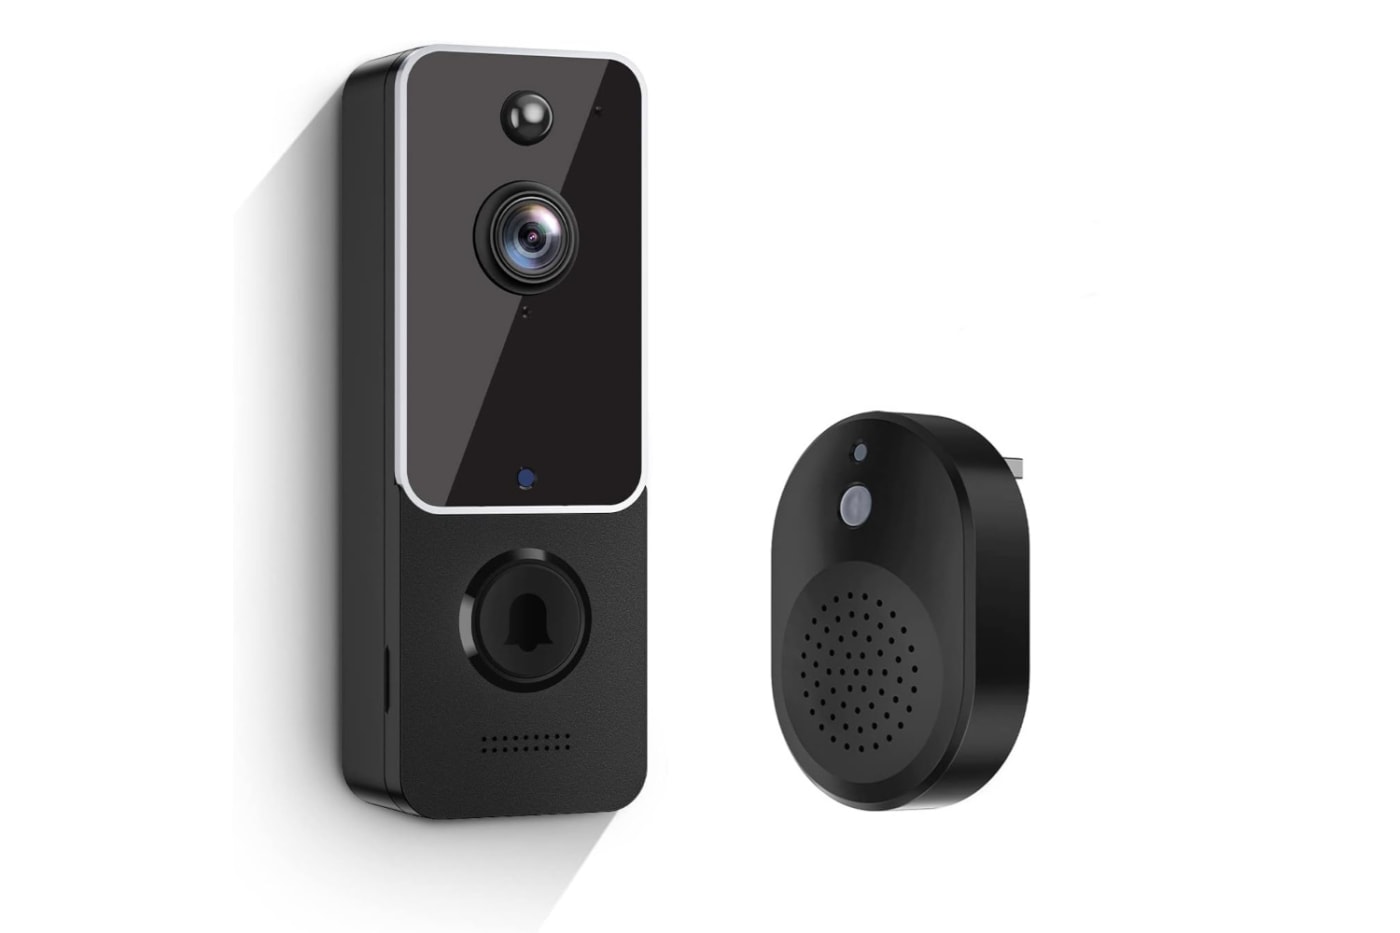 The Morning After: Your cheap video doorbell may have serious security issues